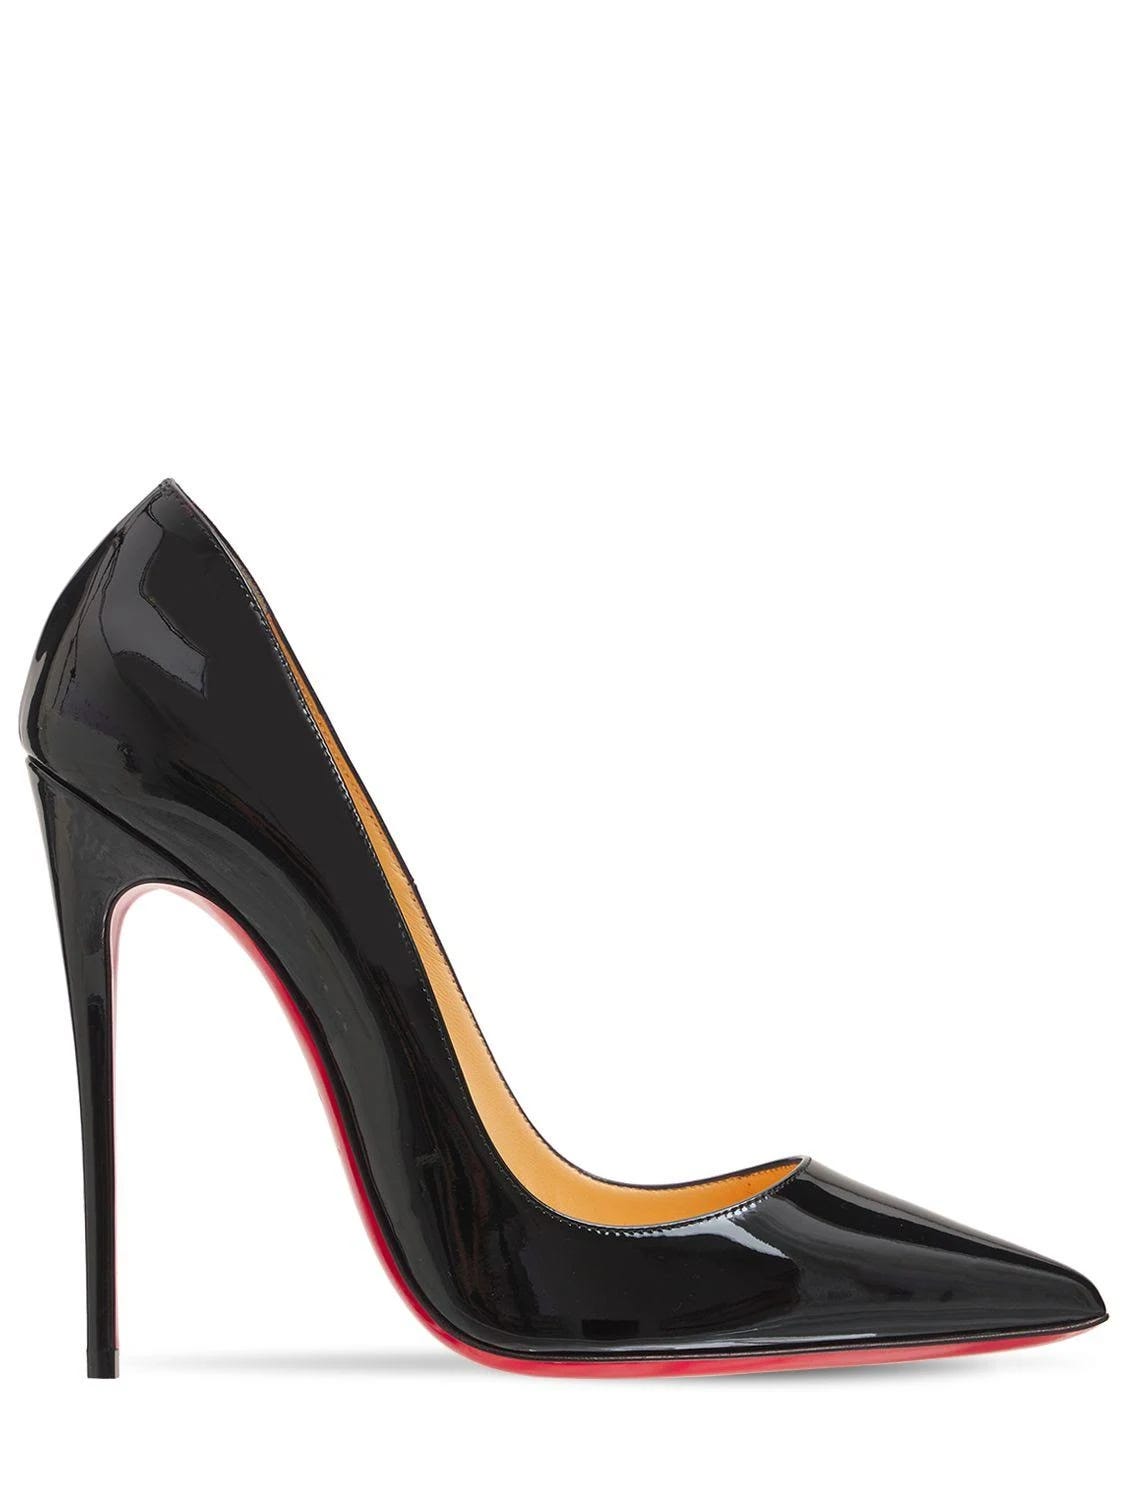 Luxury Pointed-Toe Patent Leather Pumps by Christian Louboutin | Image